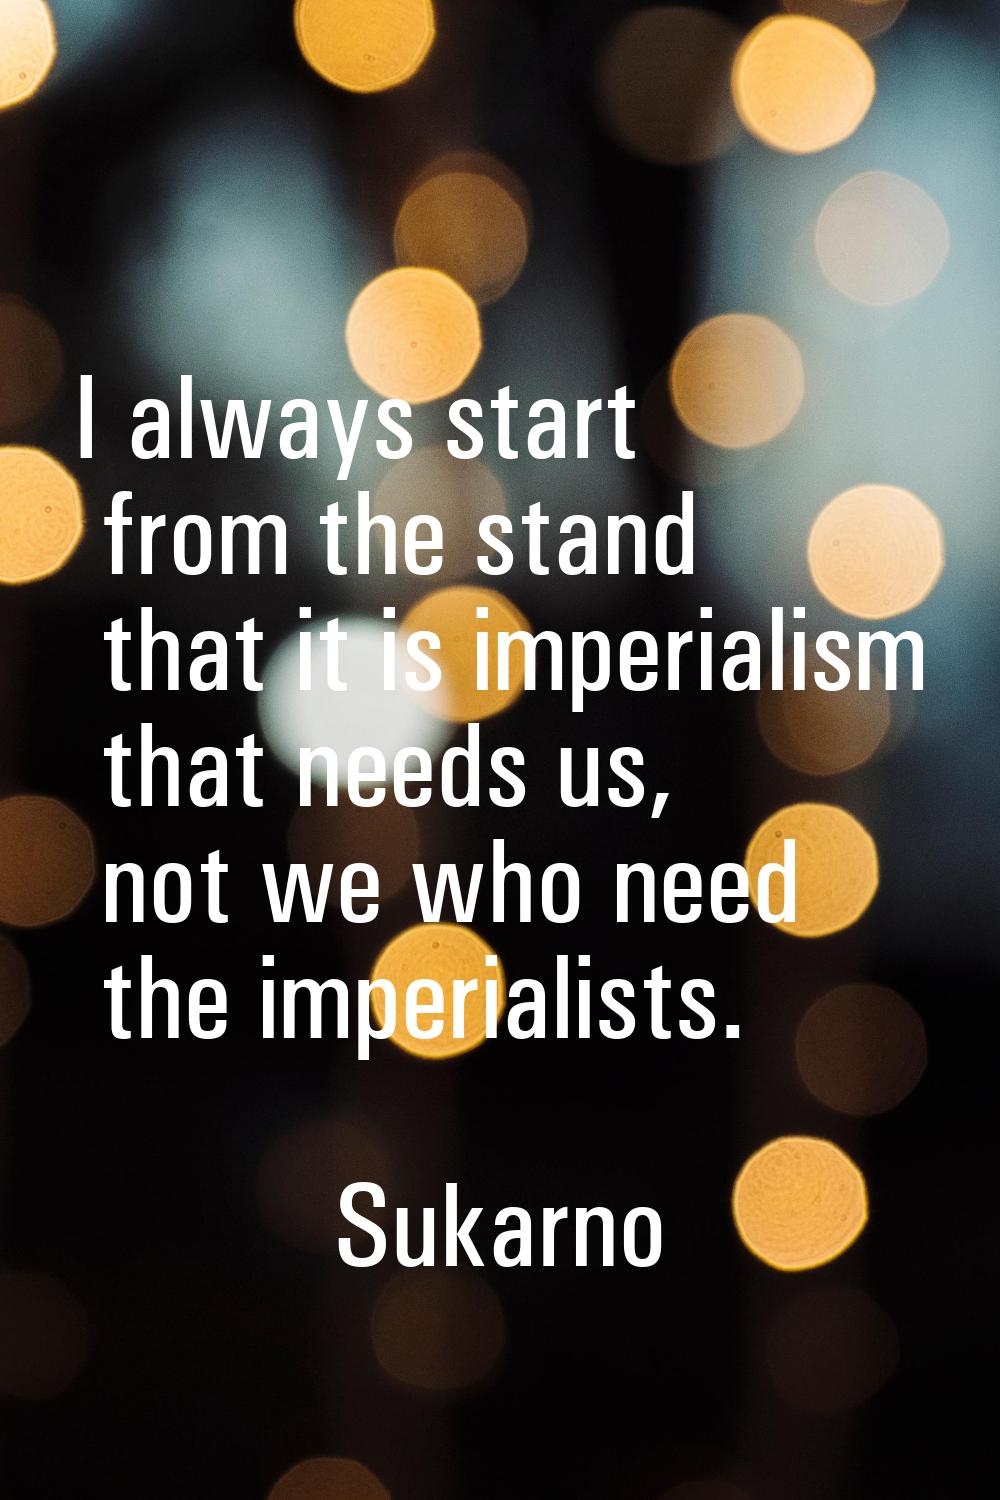 I always start from the stand that it is imperialism that needs us, not we who need the imperialist